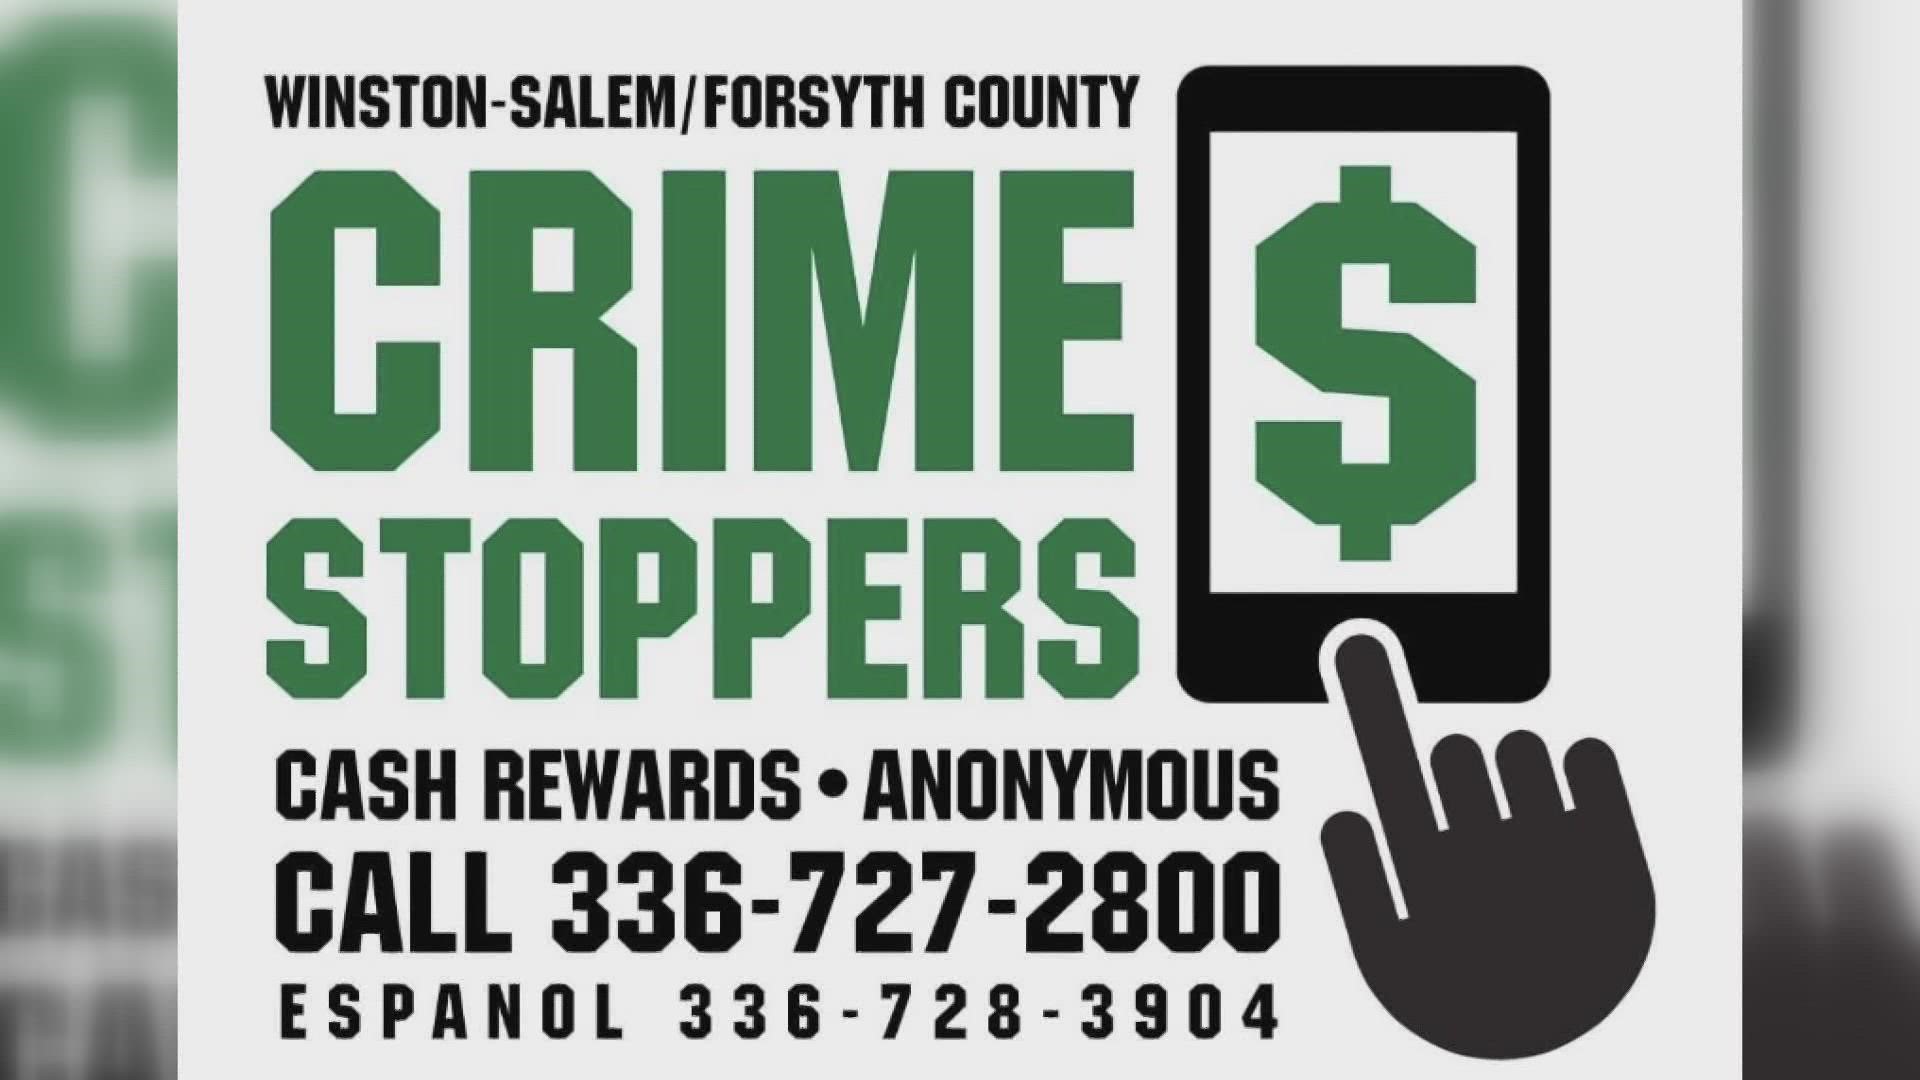 The tool is anonymous but News 2 checked base with Winston-Salem Crime Stoppers to see how anonymous it truly is.